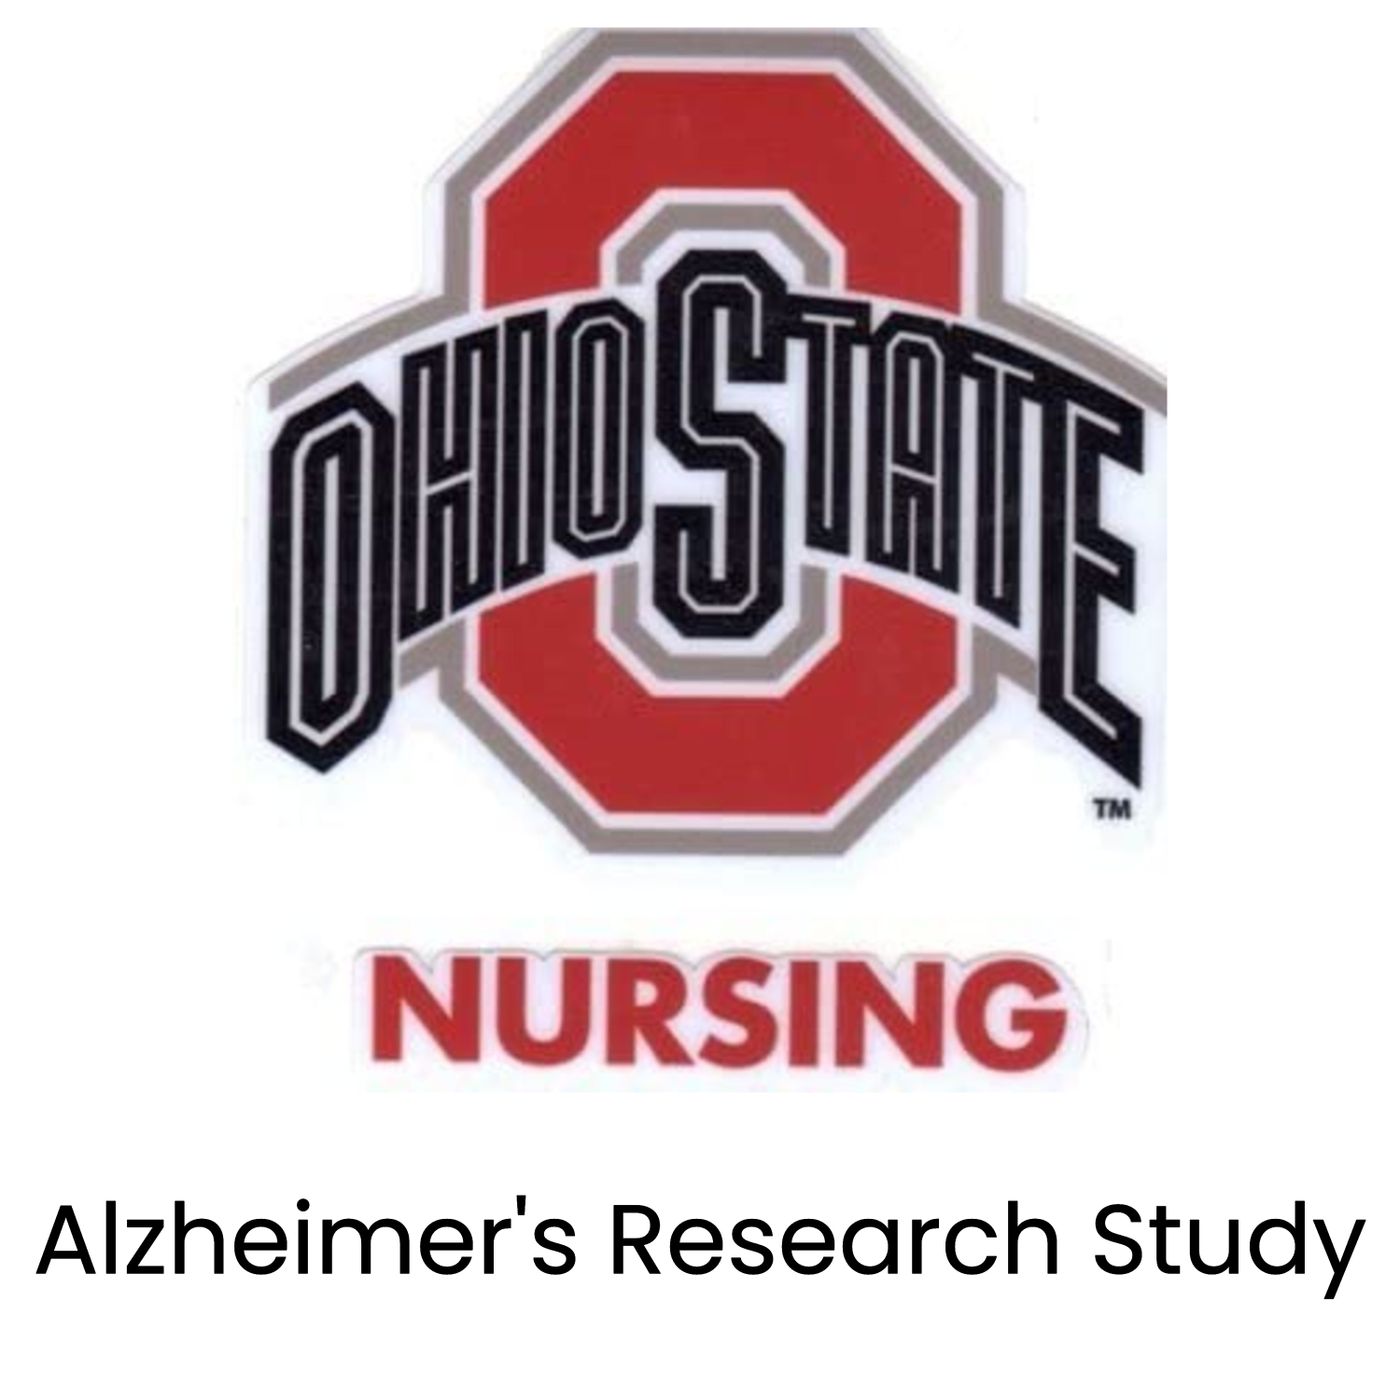 OSU Researchers Need Your Help to Understand Alzheimer’s